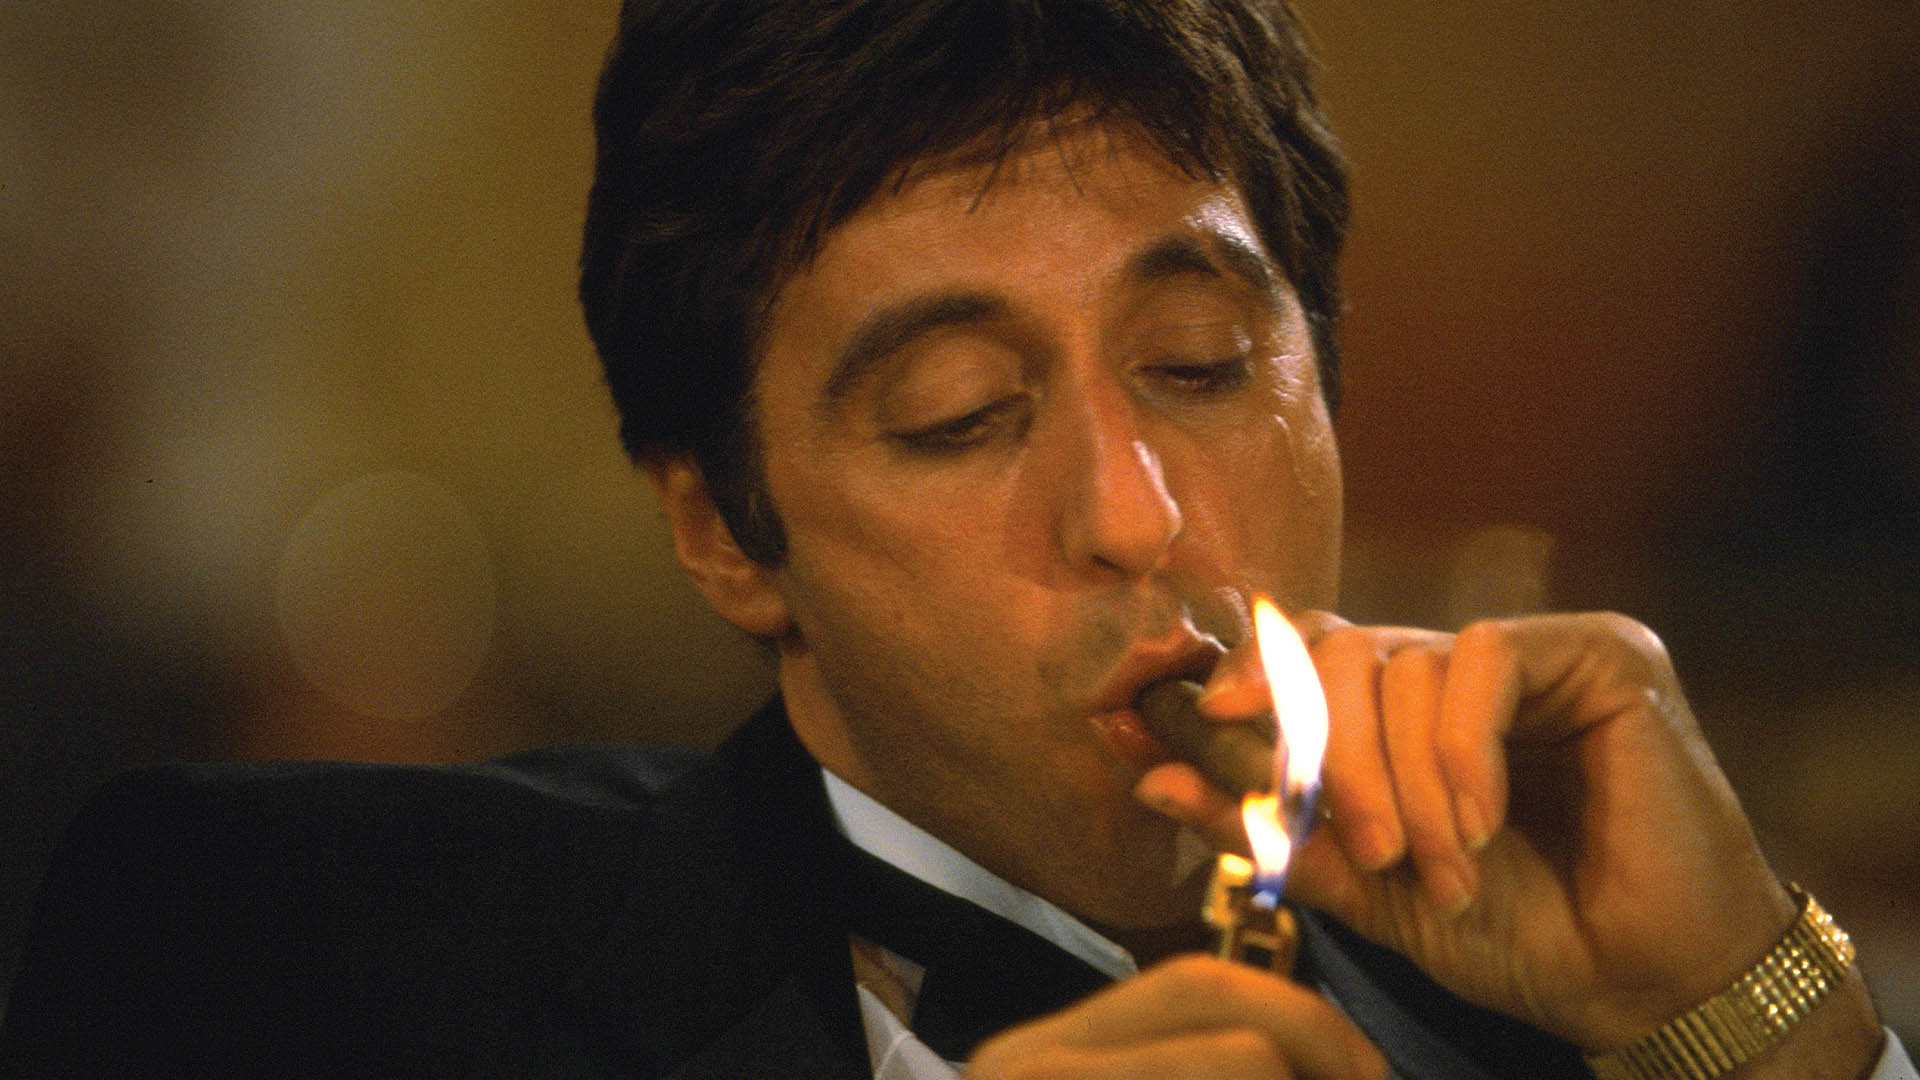 Movie Scarface HD Wallpaper | Background Image